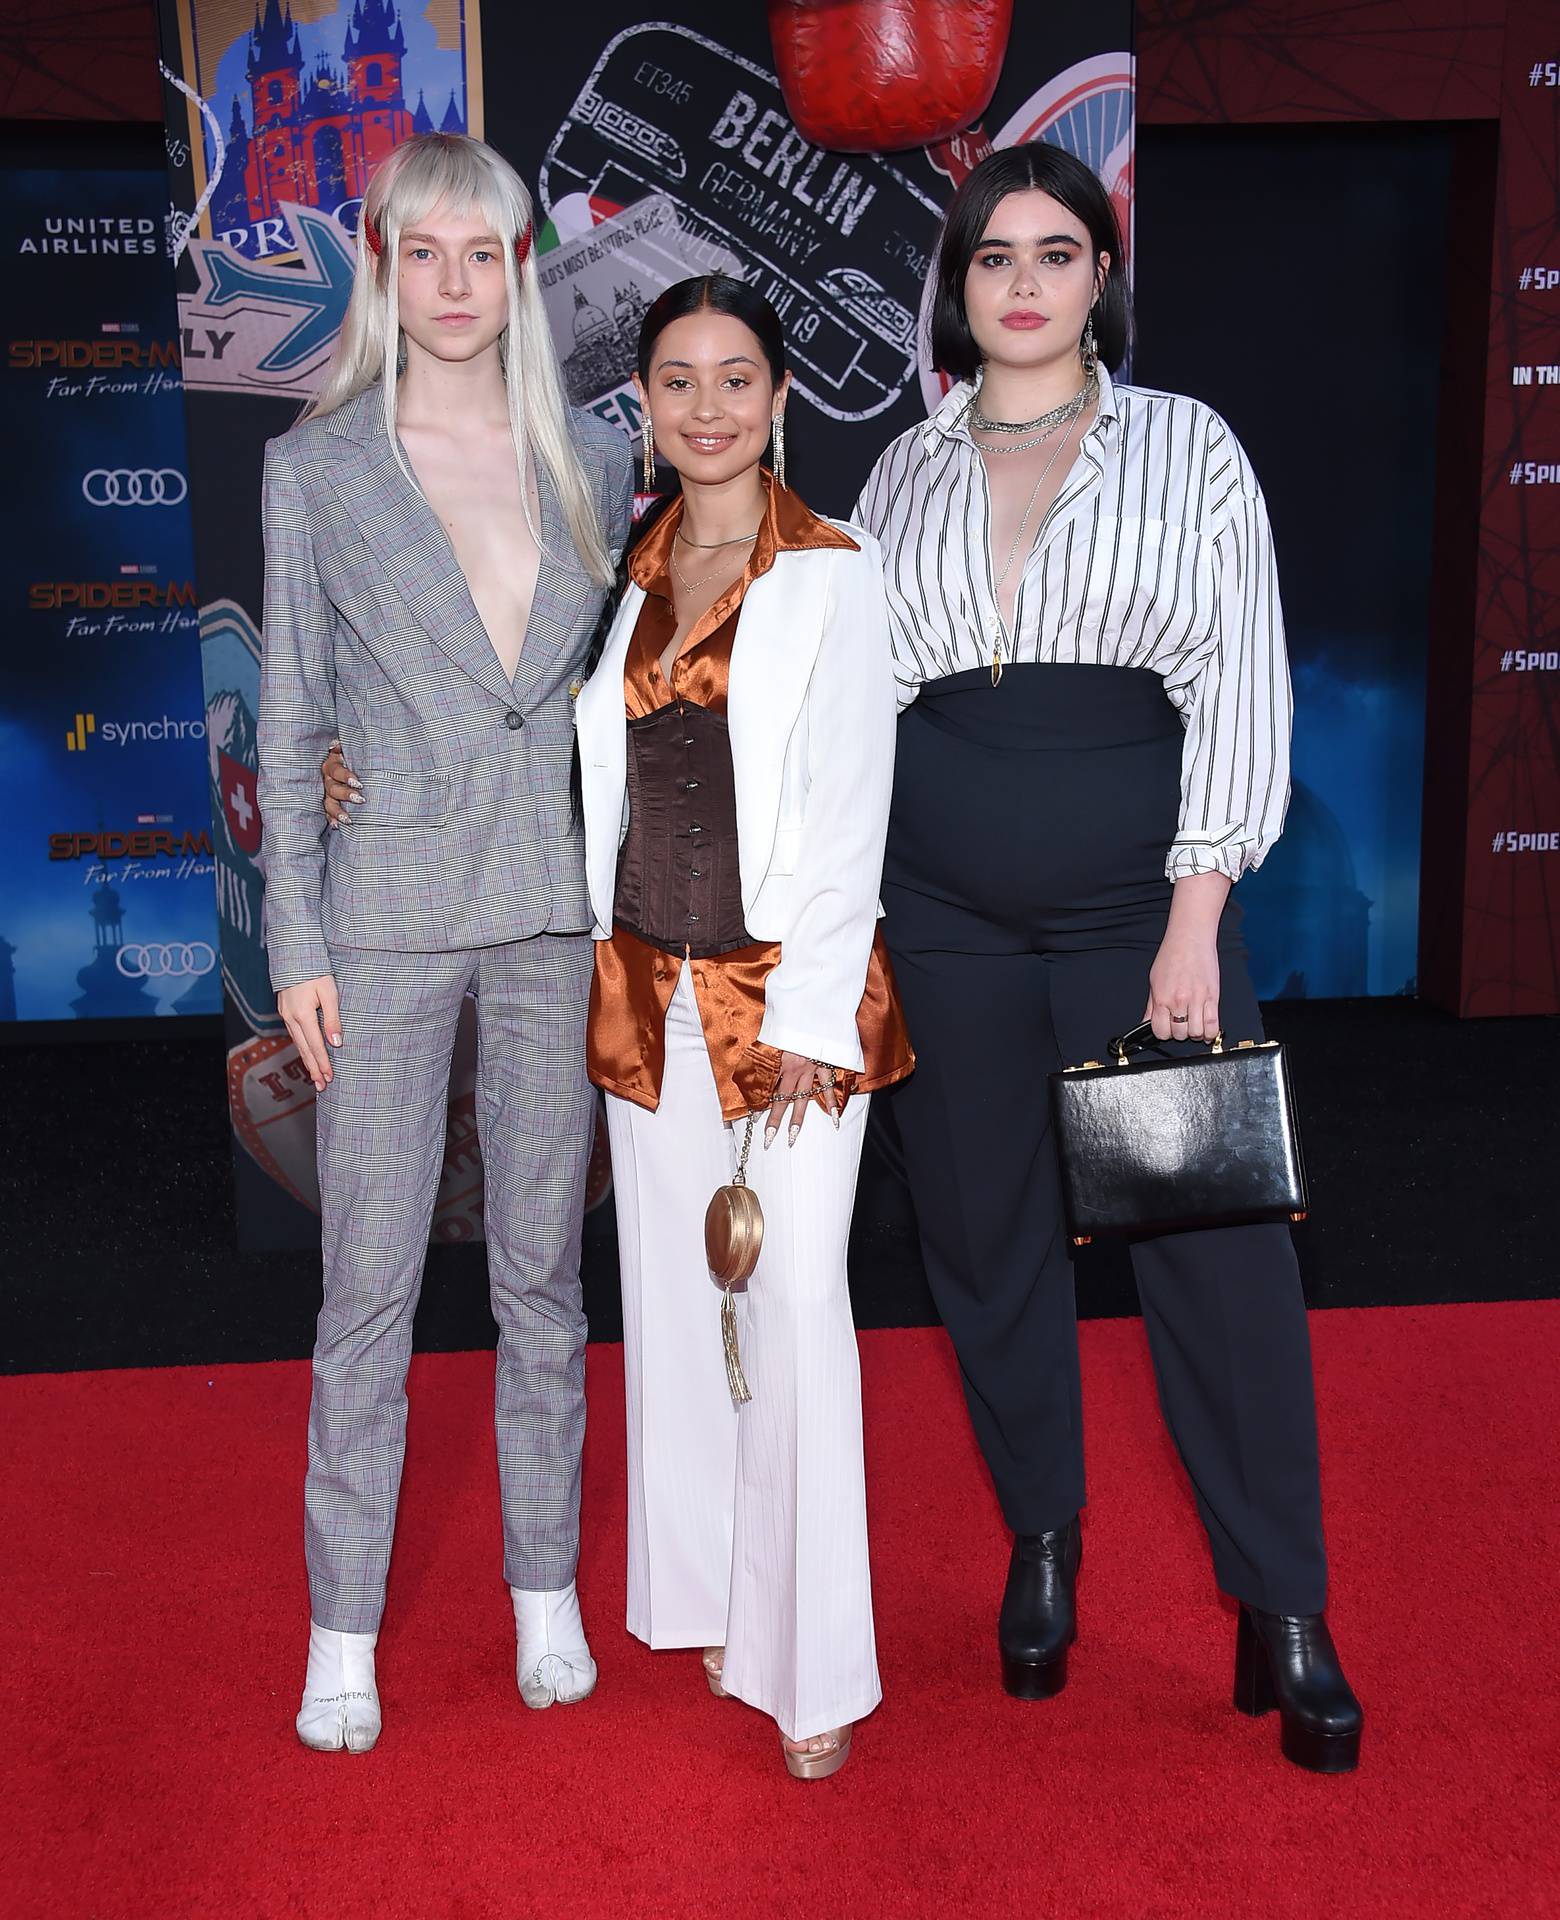 Spider-Man: Far From Home Premiere - Los Angeles